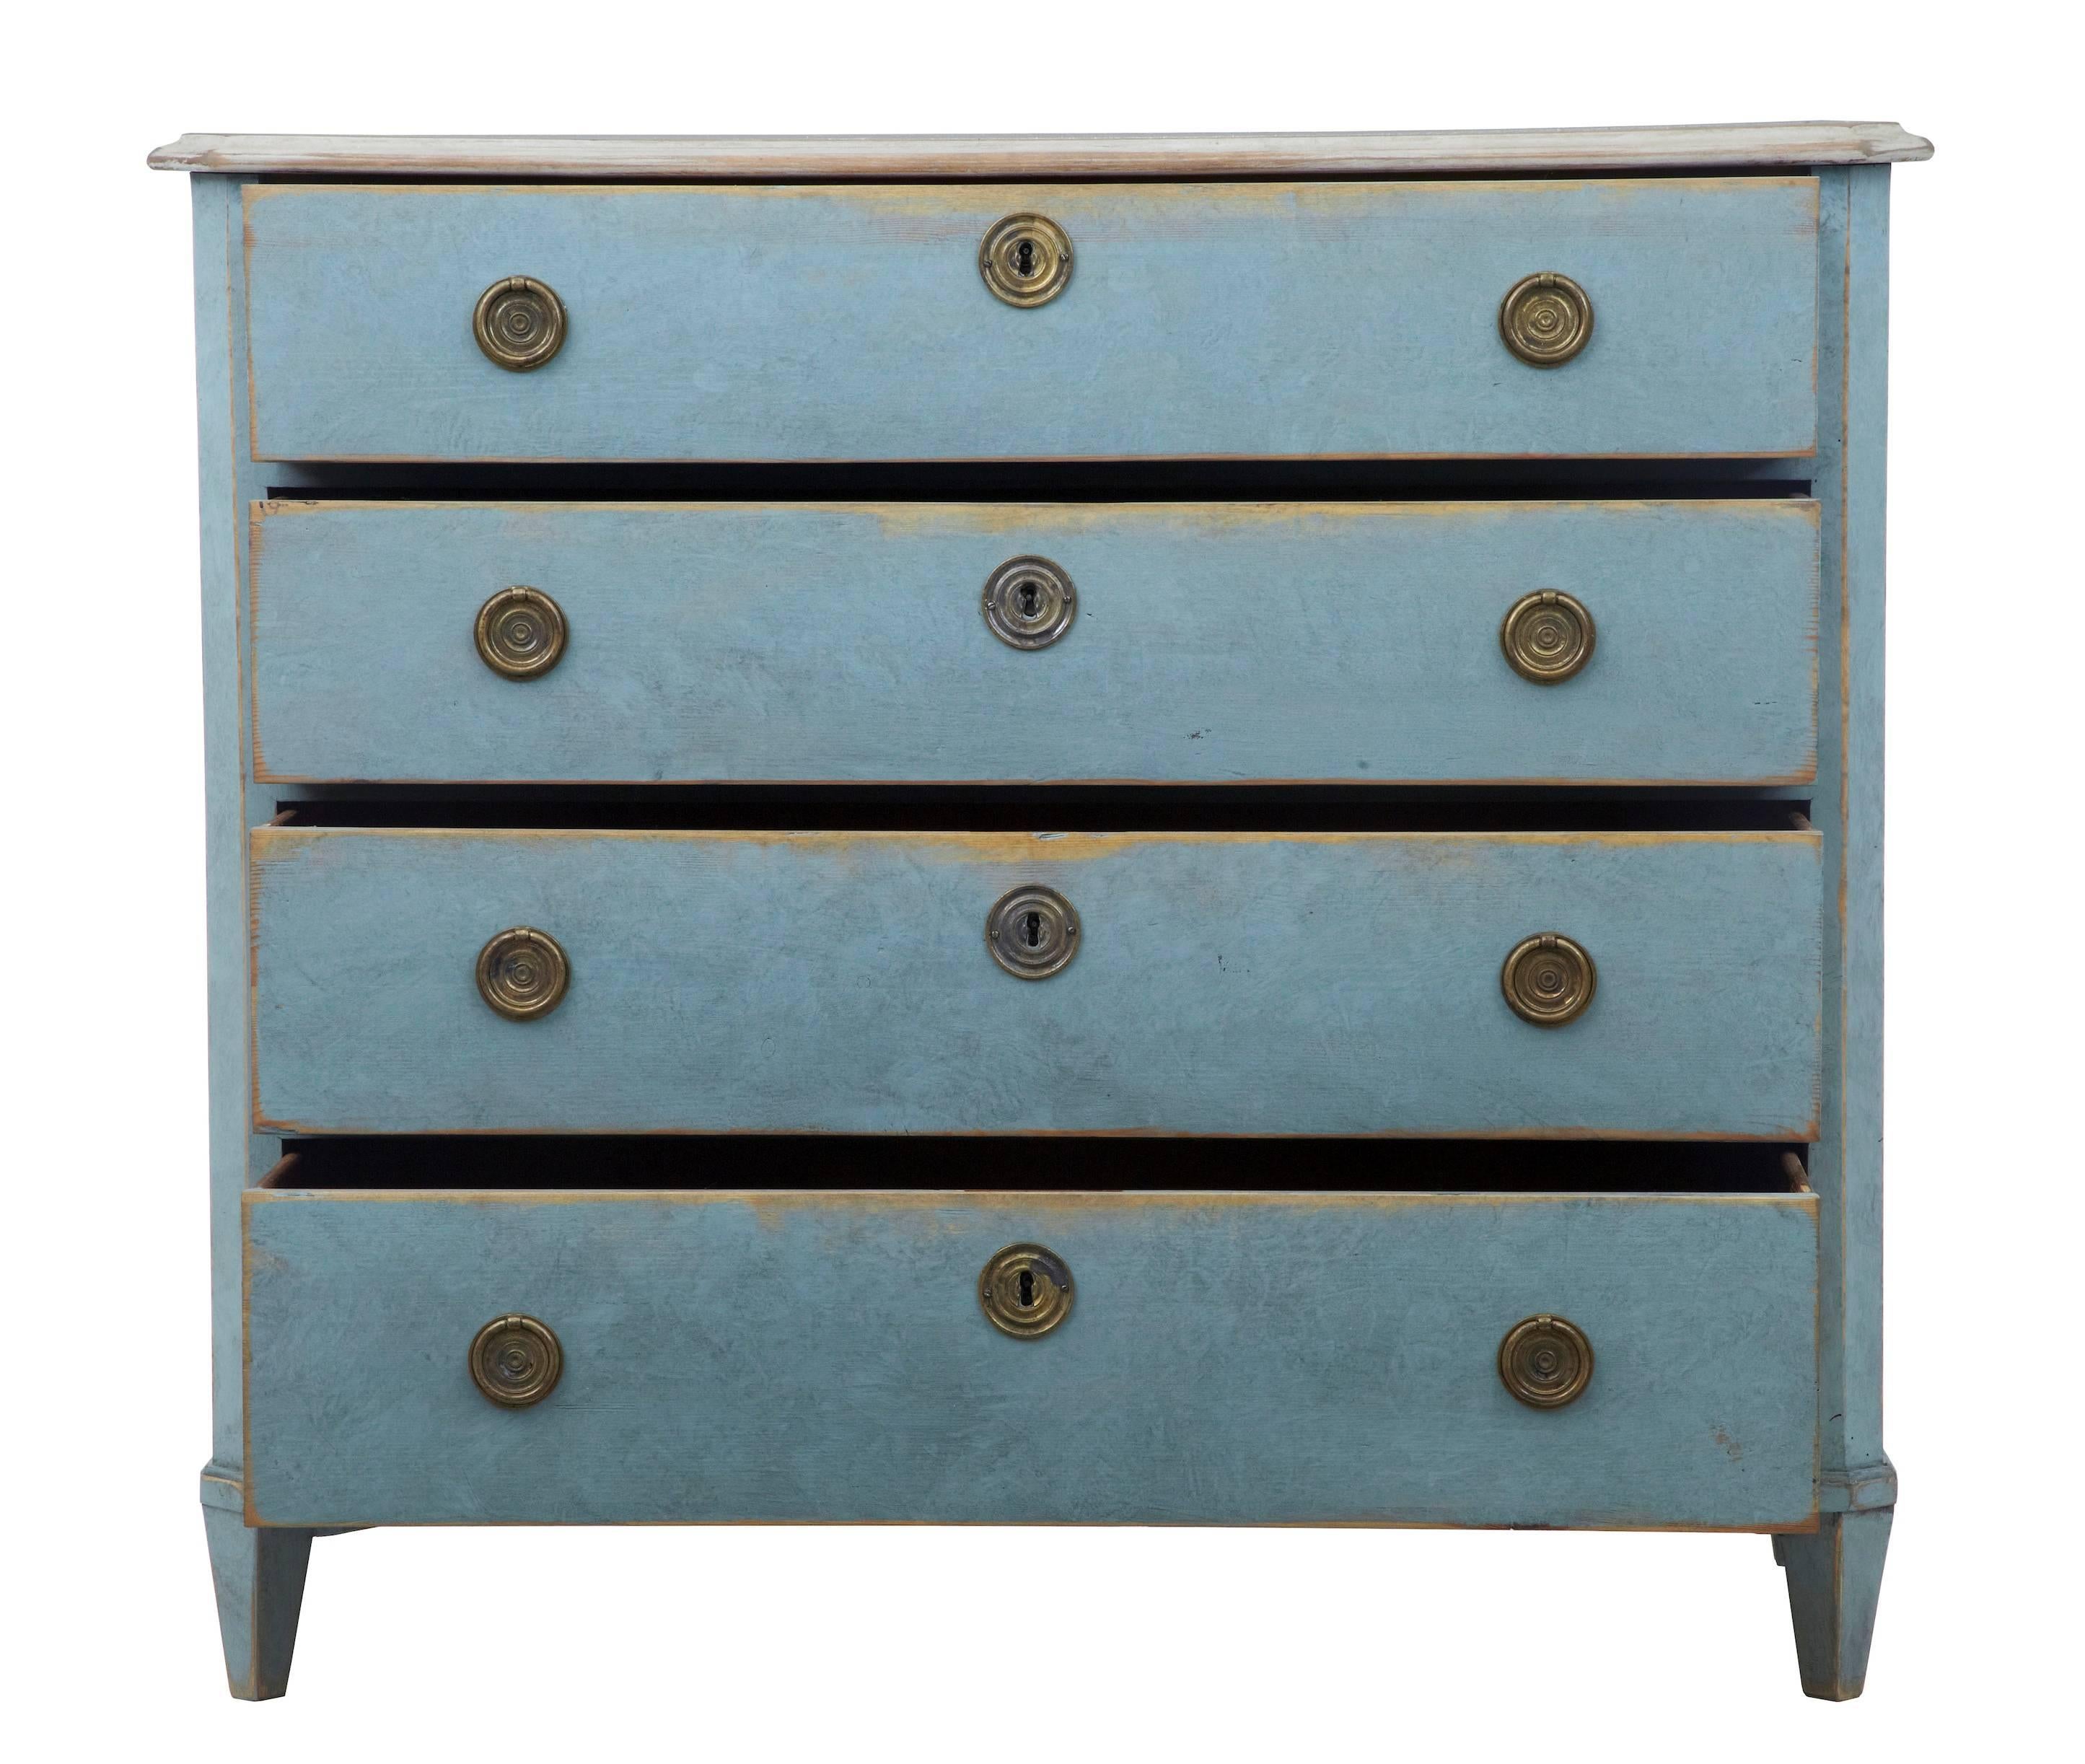 Four-drawer chest of drawers with later paint, circa 1890.

In traditional Swedish rustic color and grey painted top.
Later handles and hardware.
Standing on four tapered legs.

Measures: Height 34 1/2